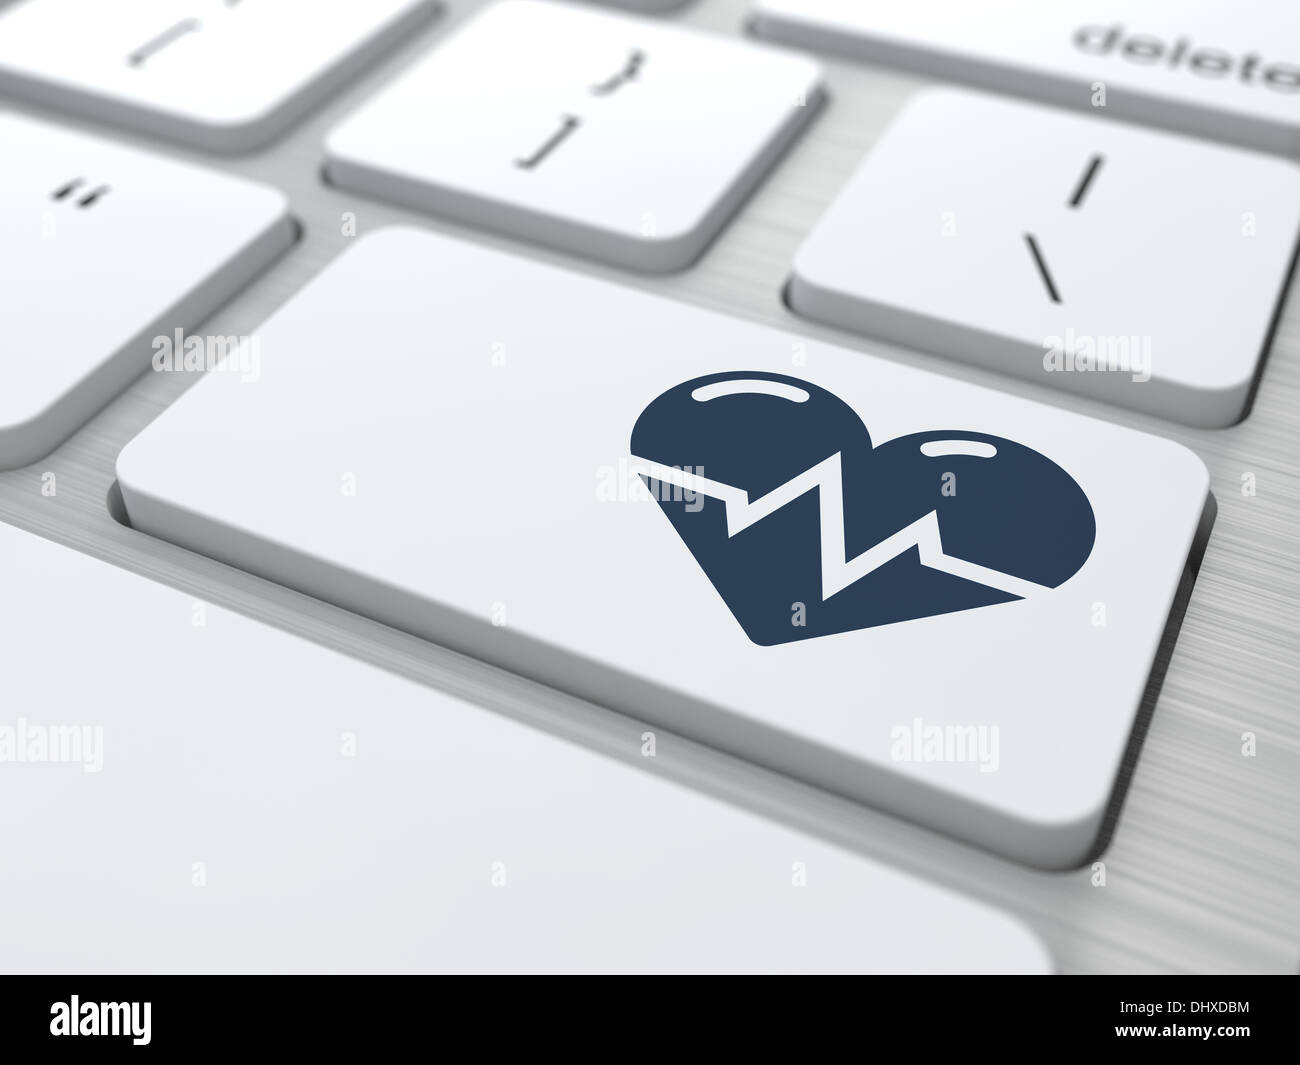 Icon of Heart with Cardiogram Line on Button. Stock Photo